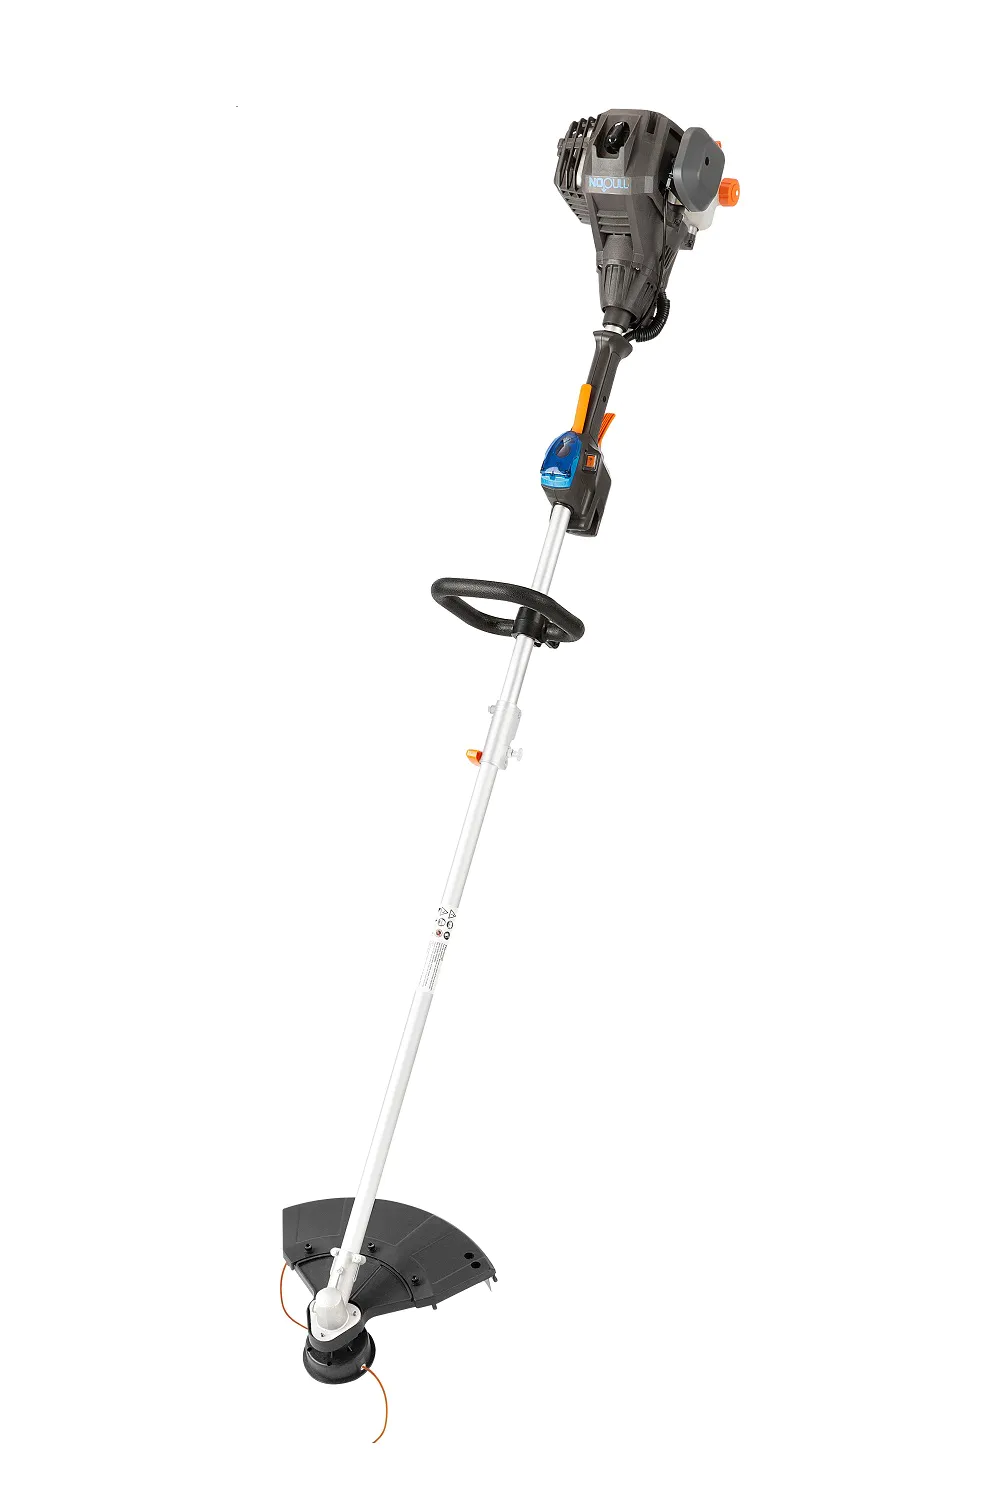 Lawnmaster 25cc Gas NO-PULL Electric Push Button Start 2-Cycle 17” Straight Shaft String Trimmer